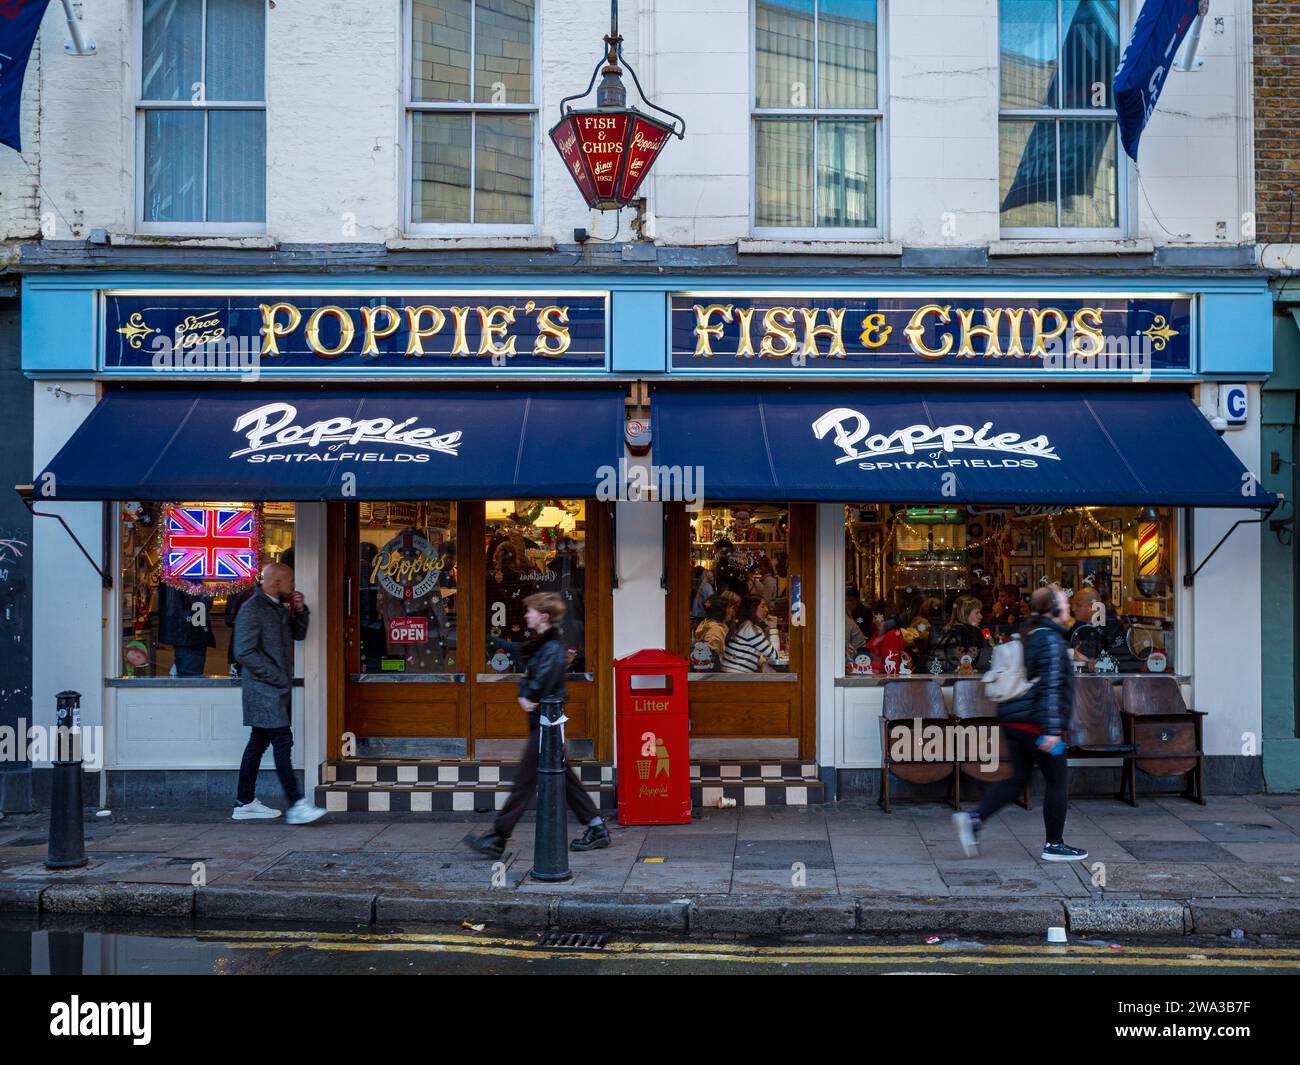 Poppie's Fish & Chips Shop Spitalfields London. Poppies Fish and Chips Shop was founded in 1952. British Fish & Chip Shop. Stock Photo